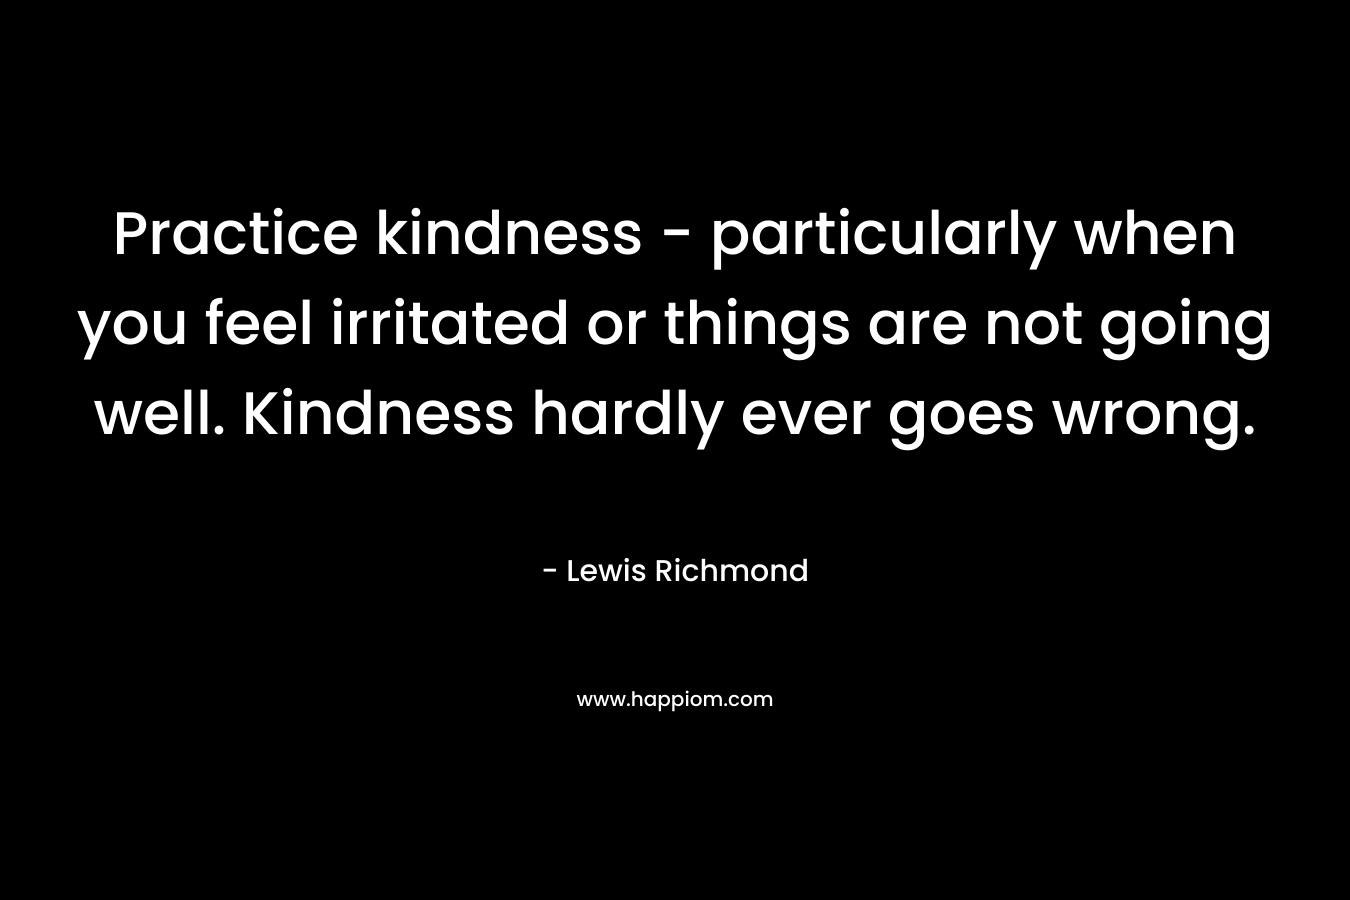 Practice kindness – particularly when you feel irritated or things are not going well. Kindness hardly ever goes wrong. – Lewis Richmond